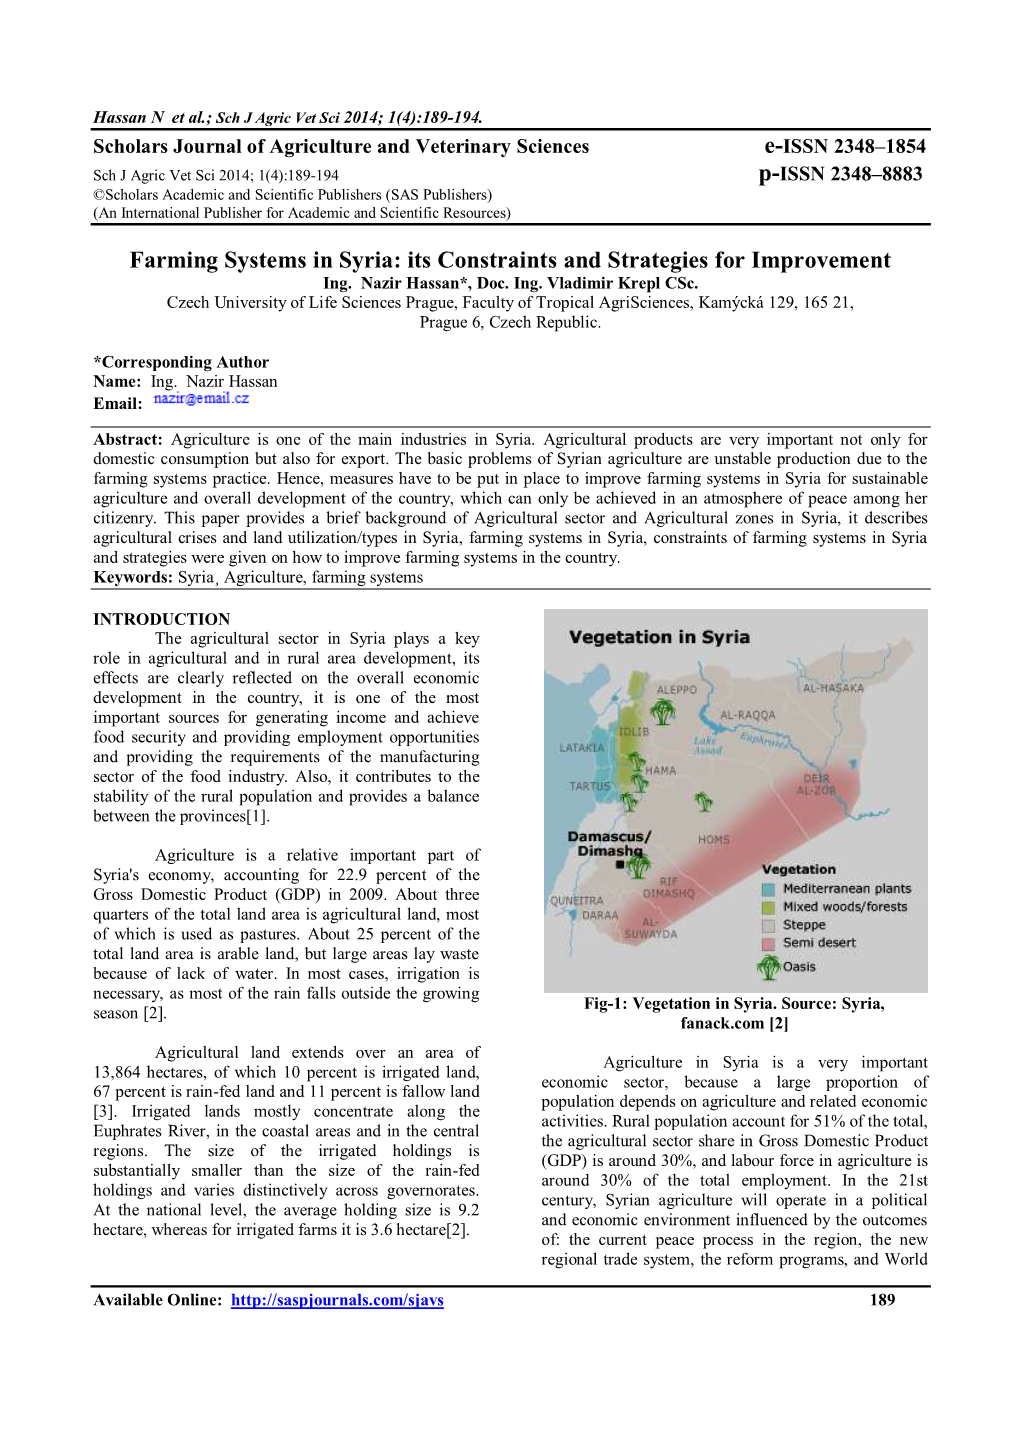 Farming Systems in Syria: Its Constraints and Strategies for Improvement Ing